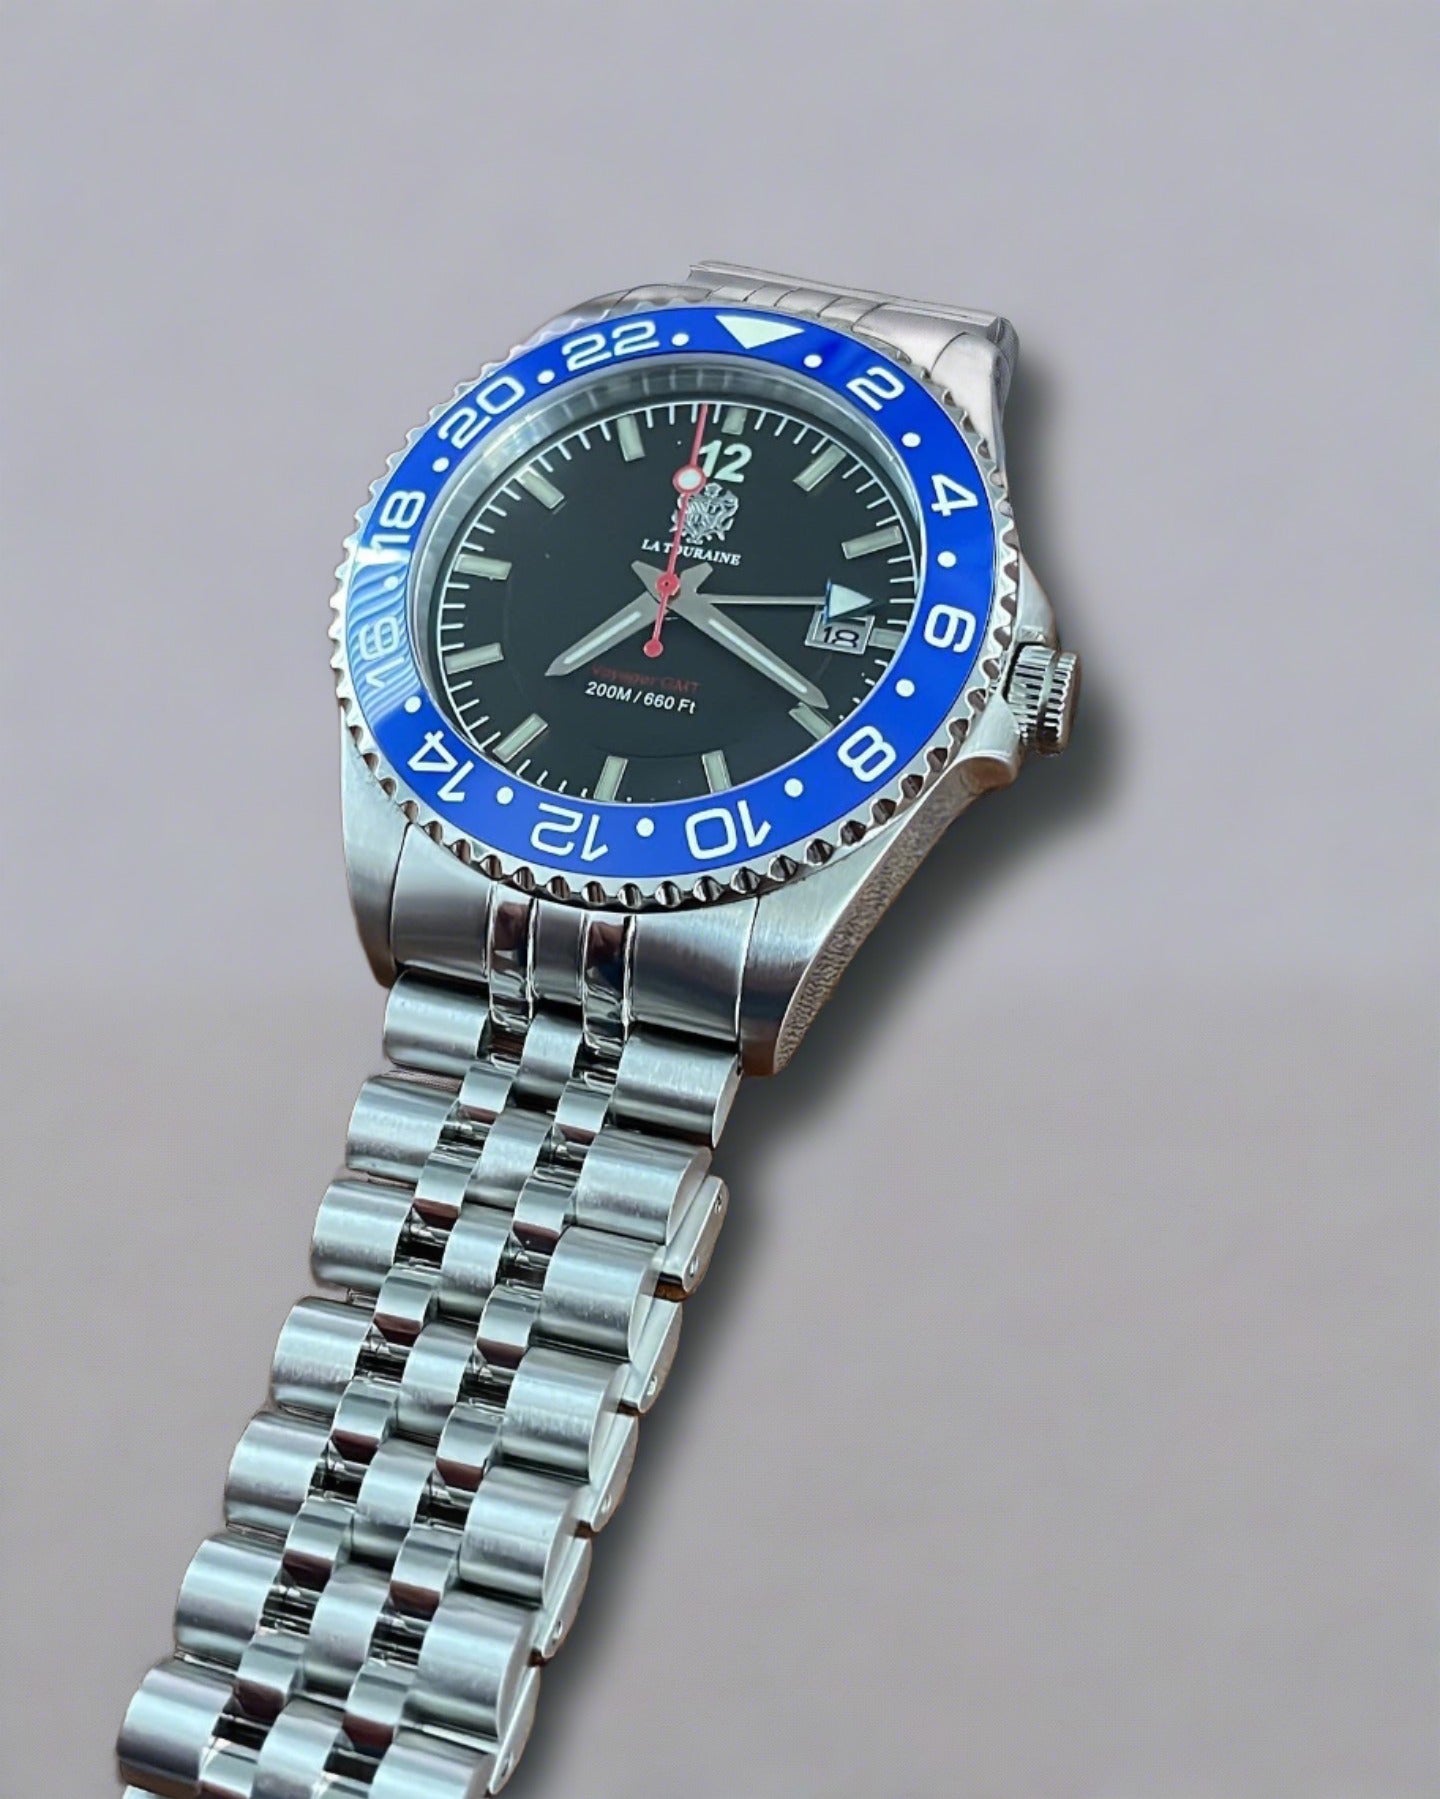 Voyager GMT | Affordable GMT Watch